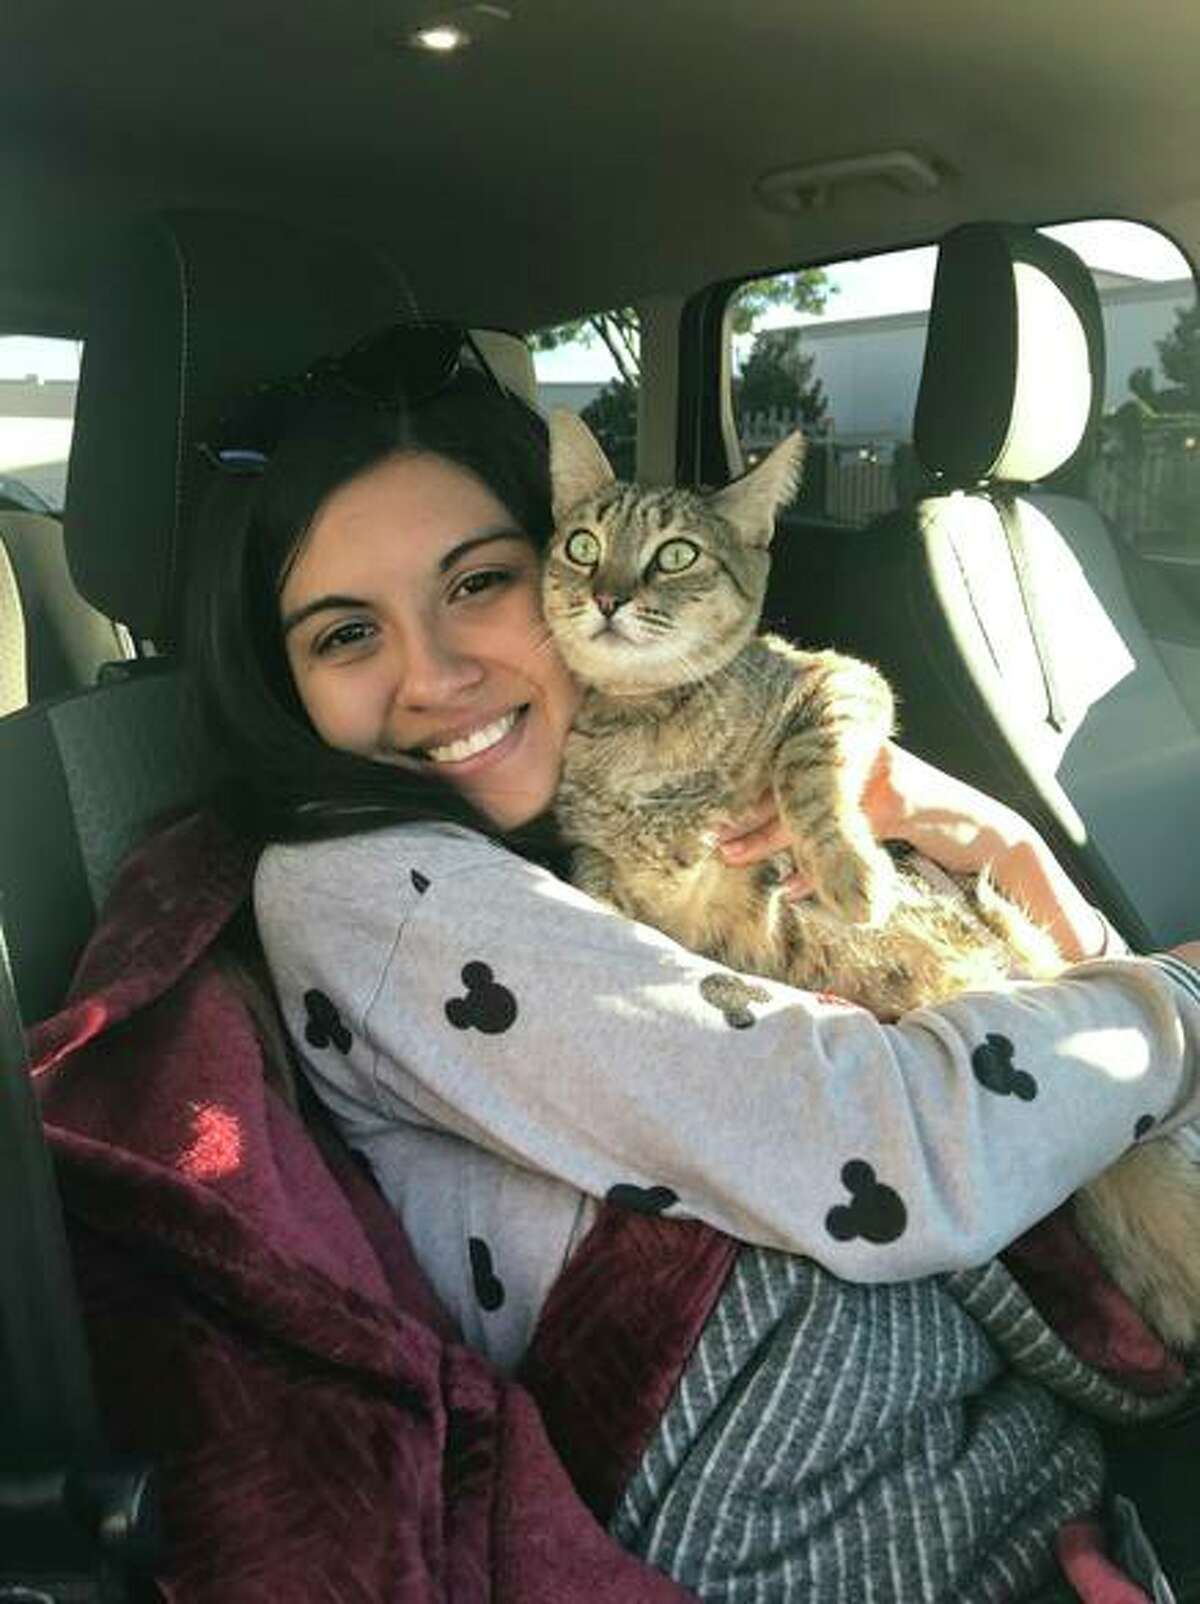 Minnelusa, a cat stolen last month, is back with Karla Cardoso and her husband.